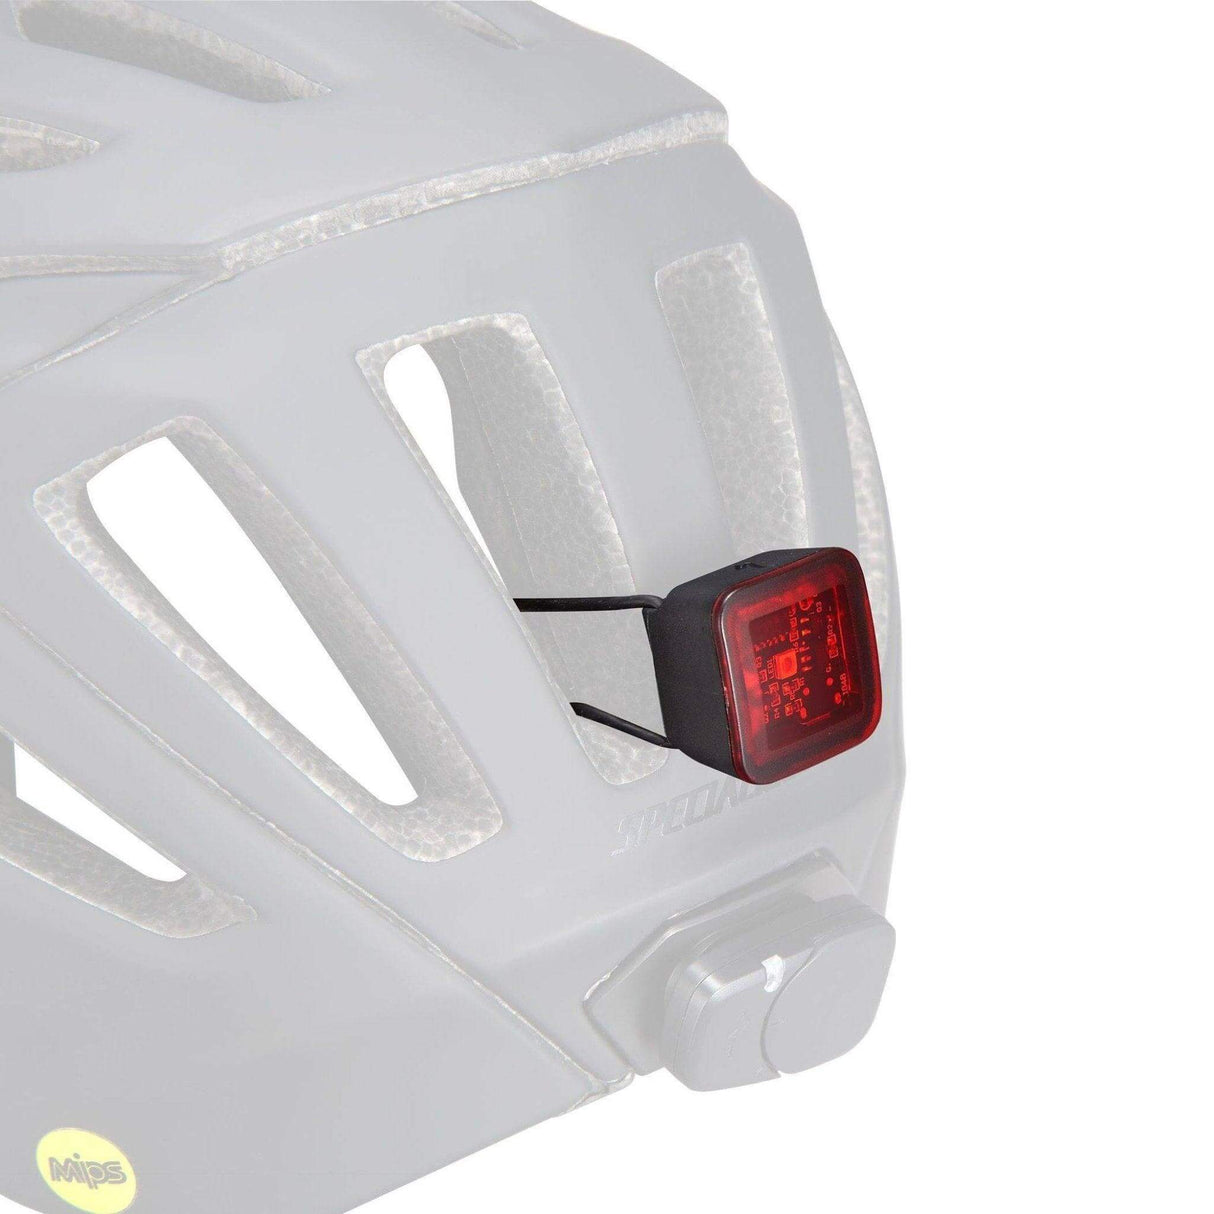 Garmin Varia UT800 Smart Headlight  Strictly Bicycles – Strictly Bicycles